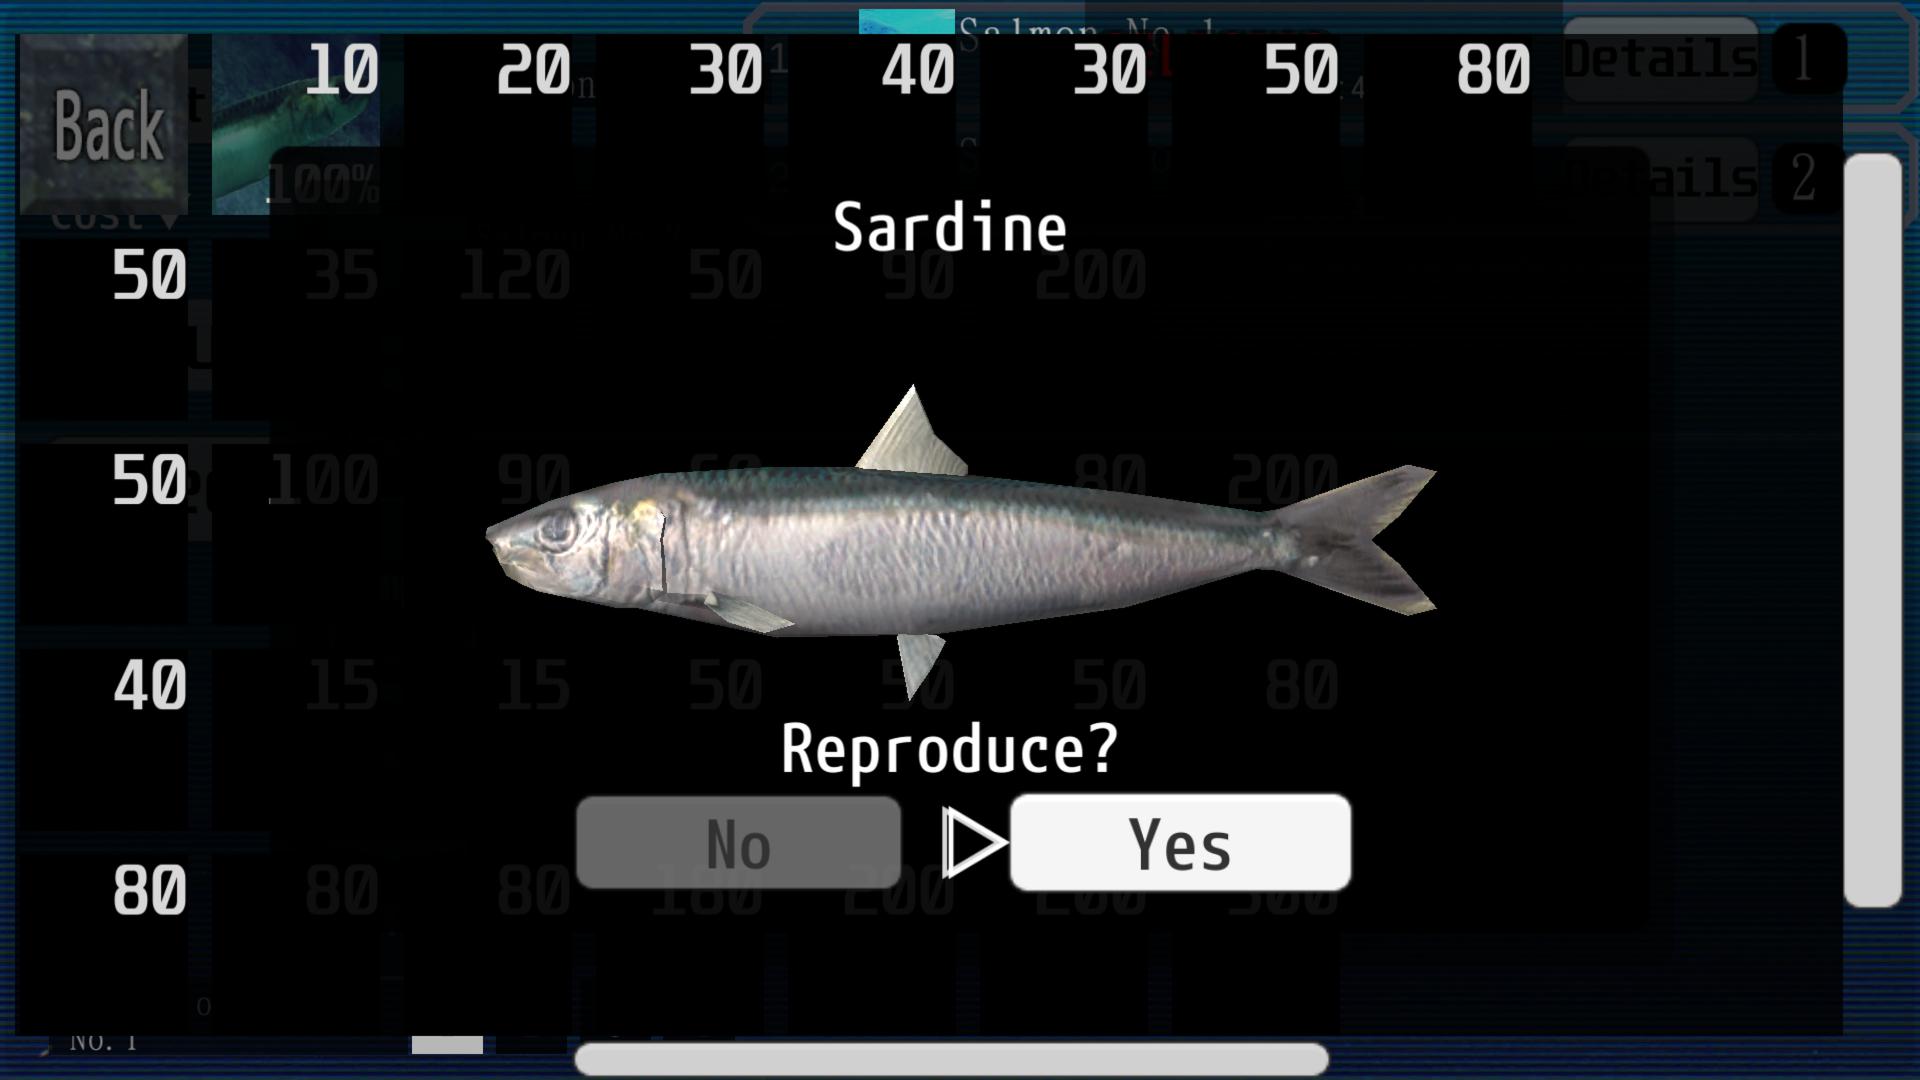 A screenshot from Ace Of Seafood. It's a sardine with a yes/no choice for the question Reproduce?